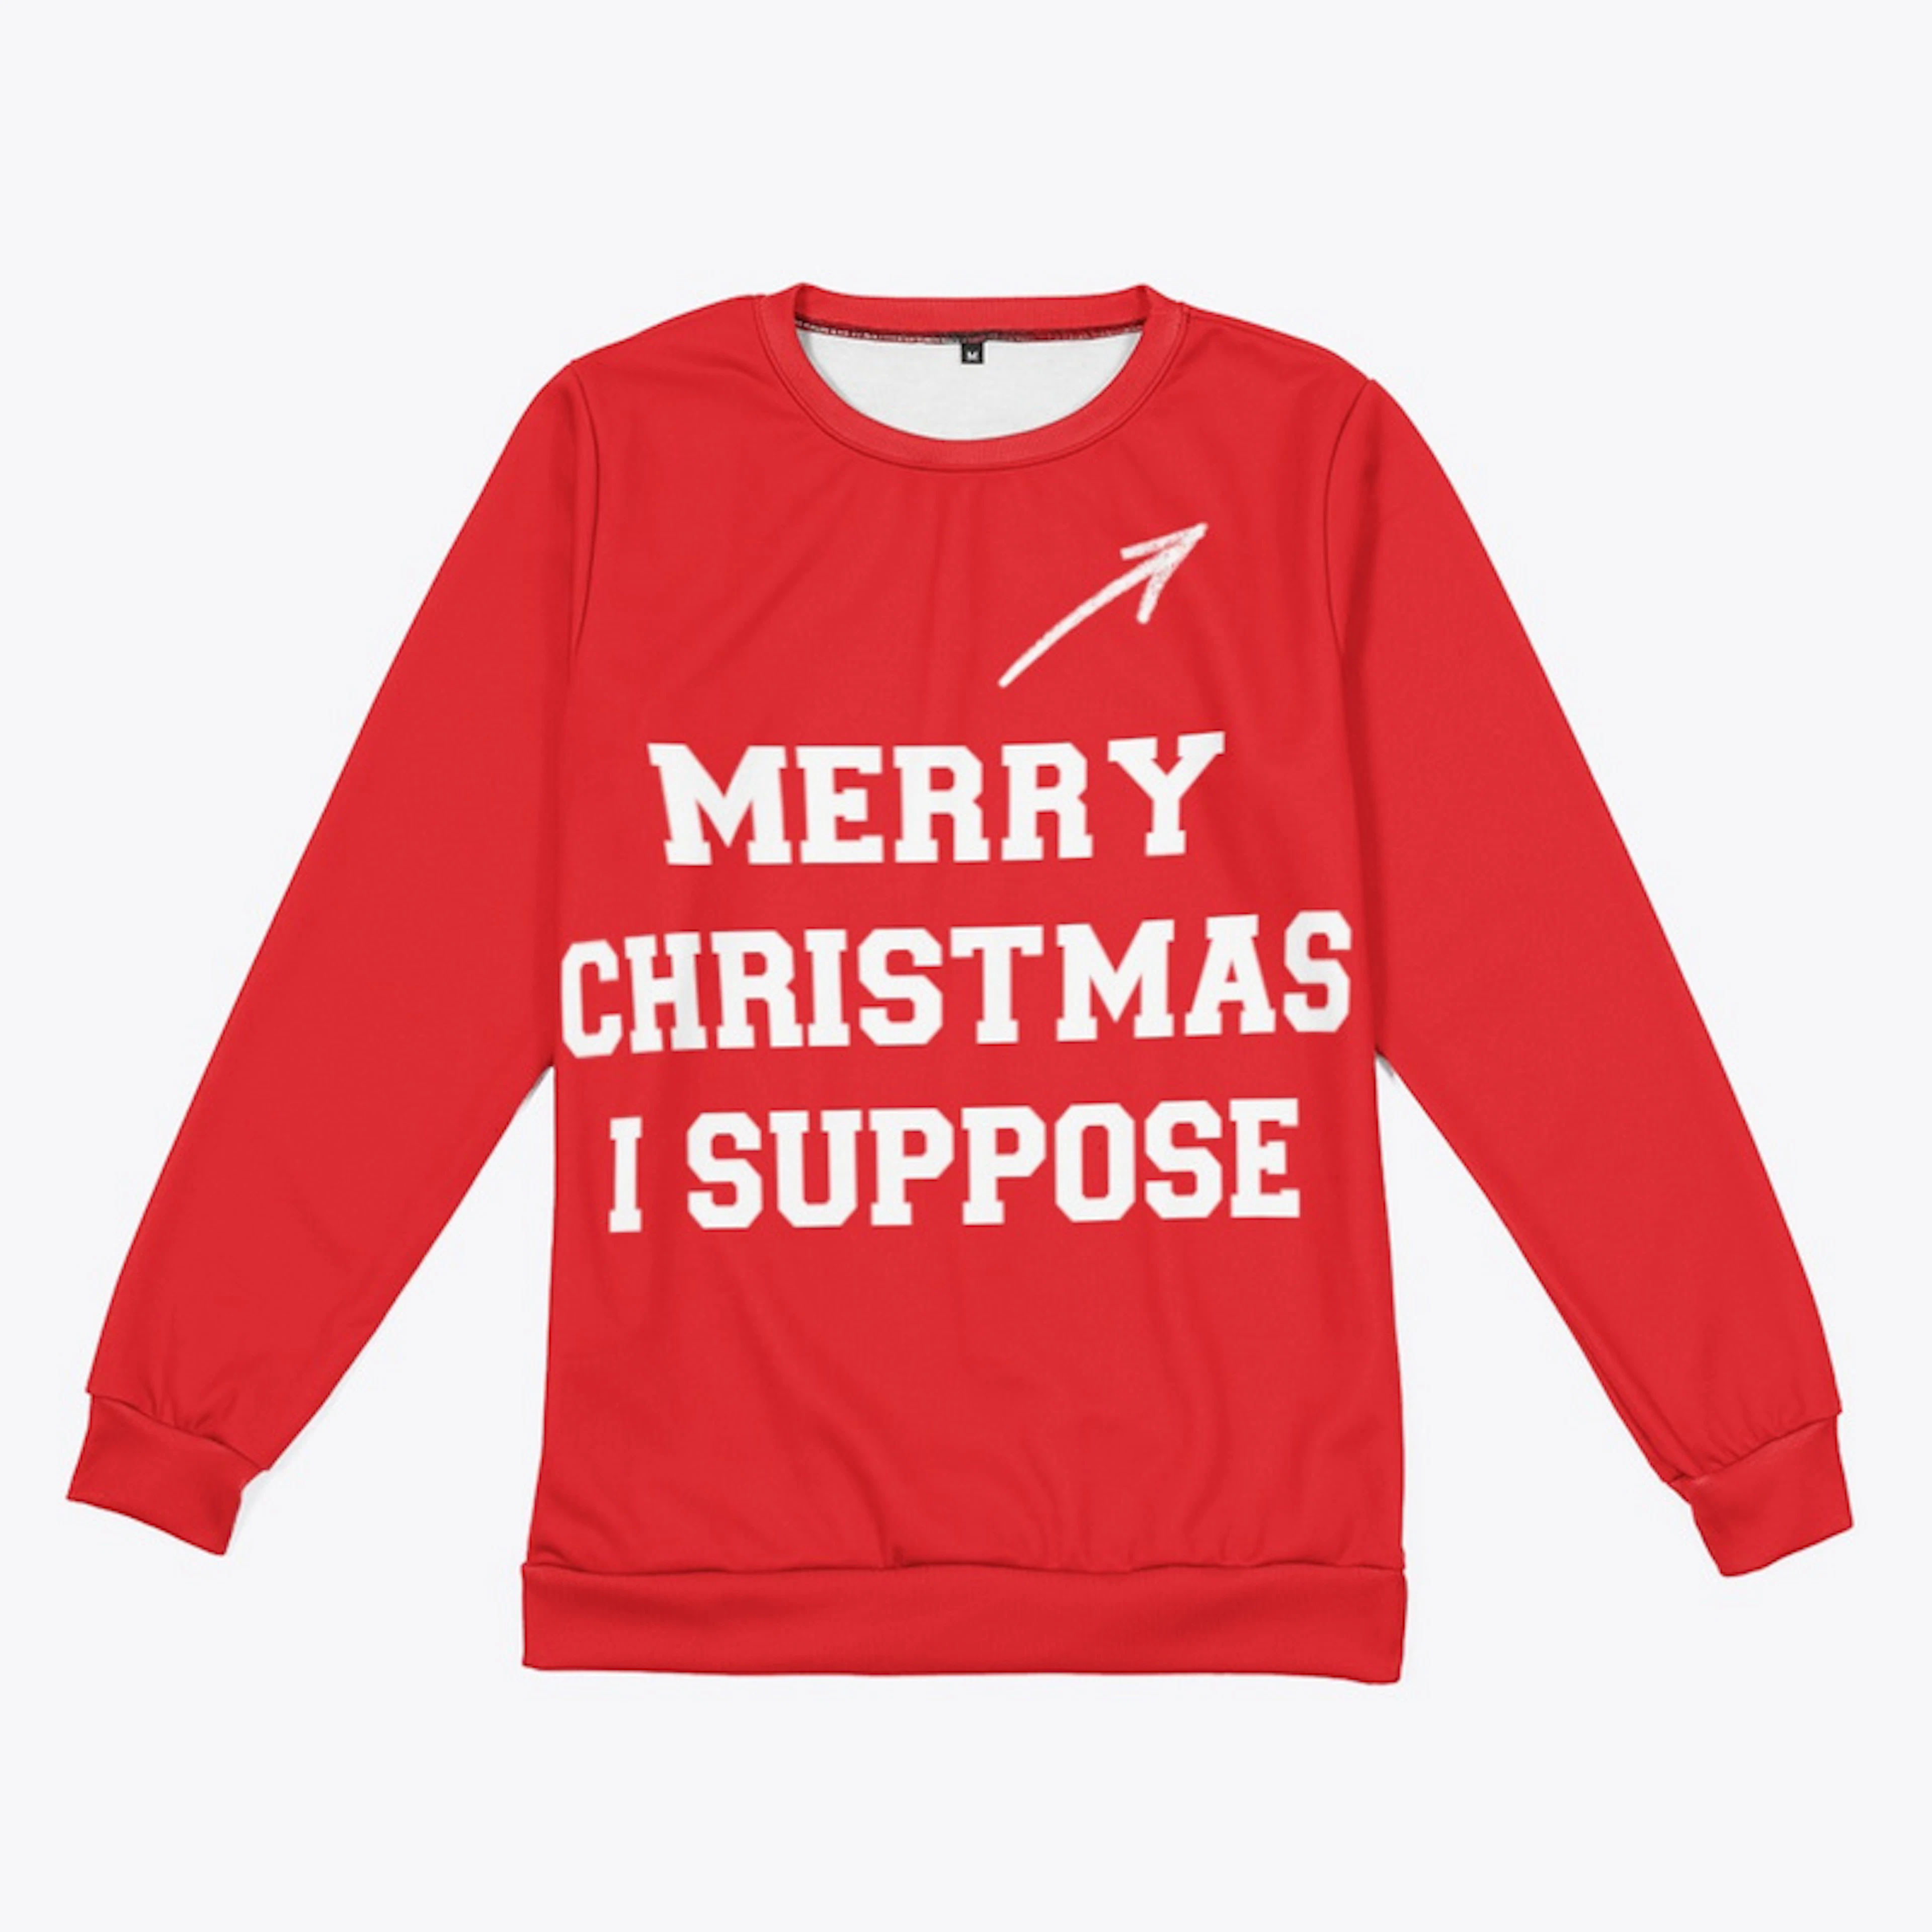 "Merry Christmas... I suppose"-Jumper.